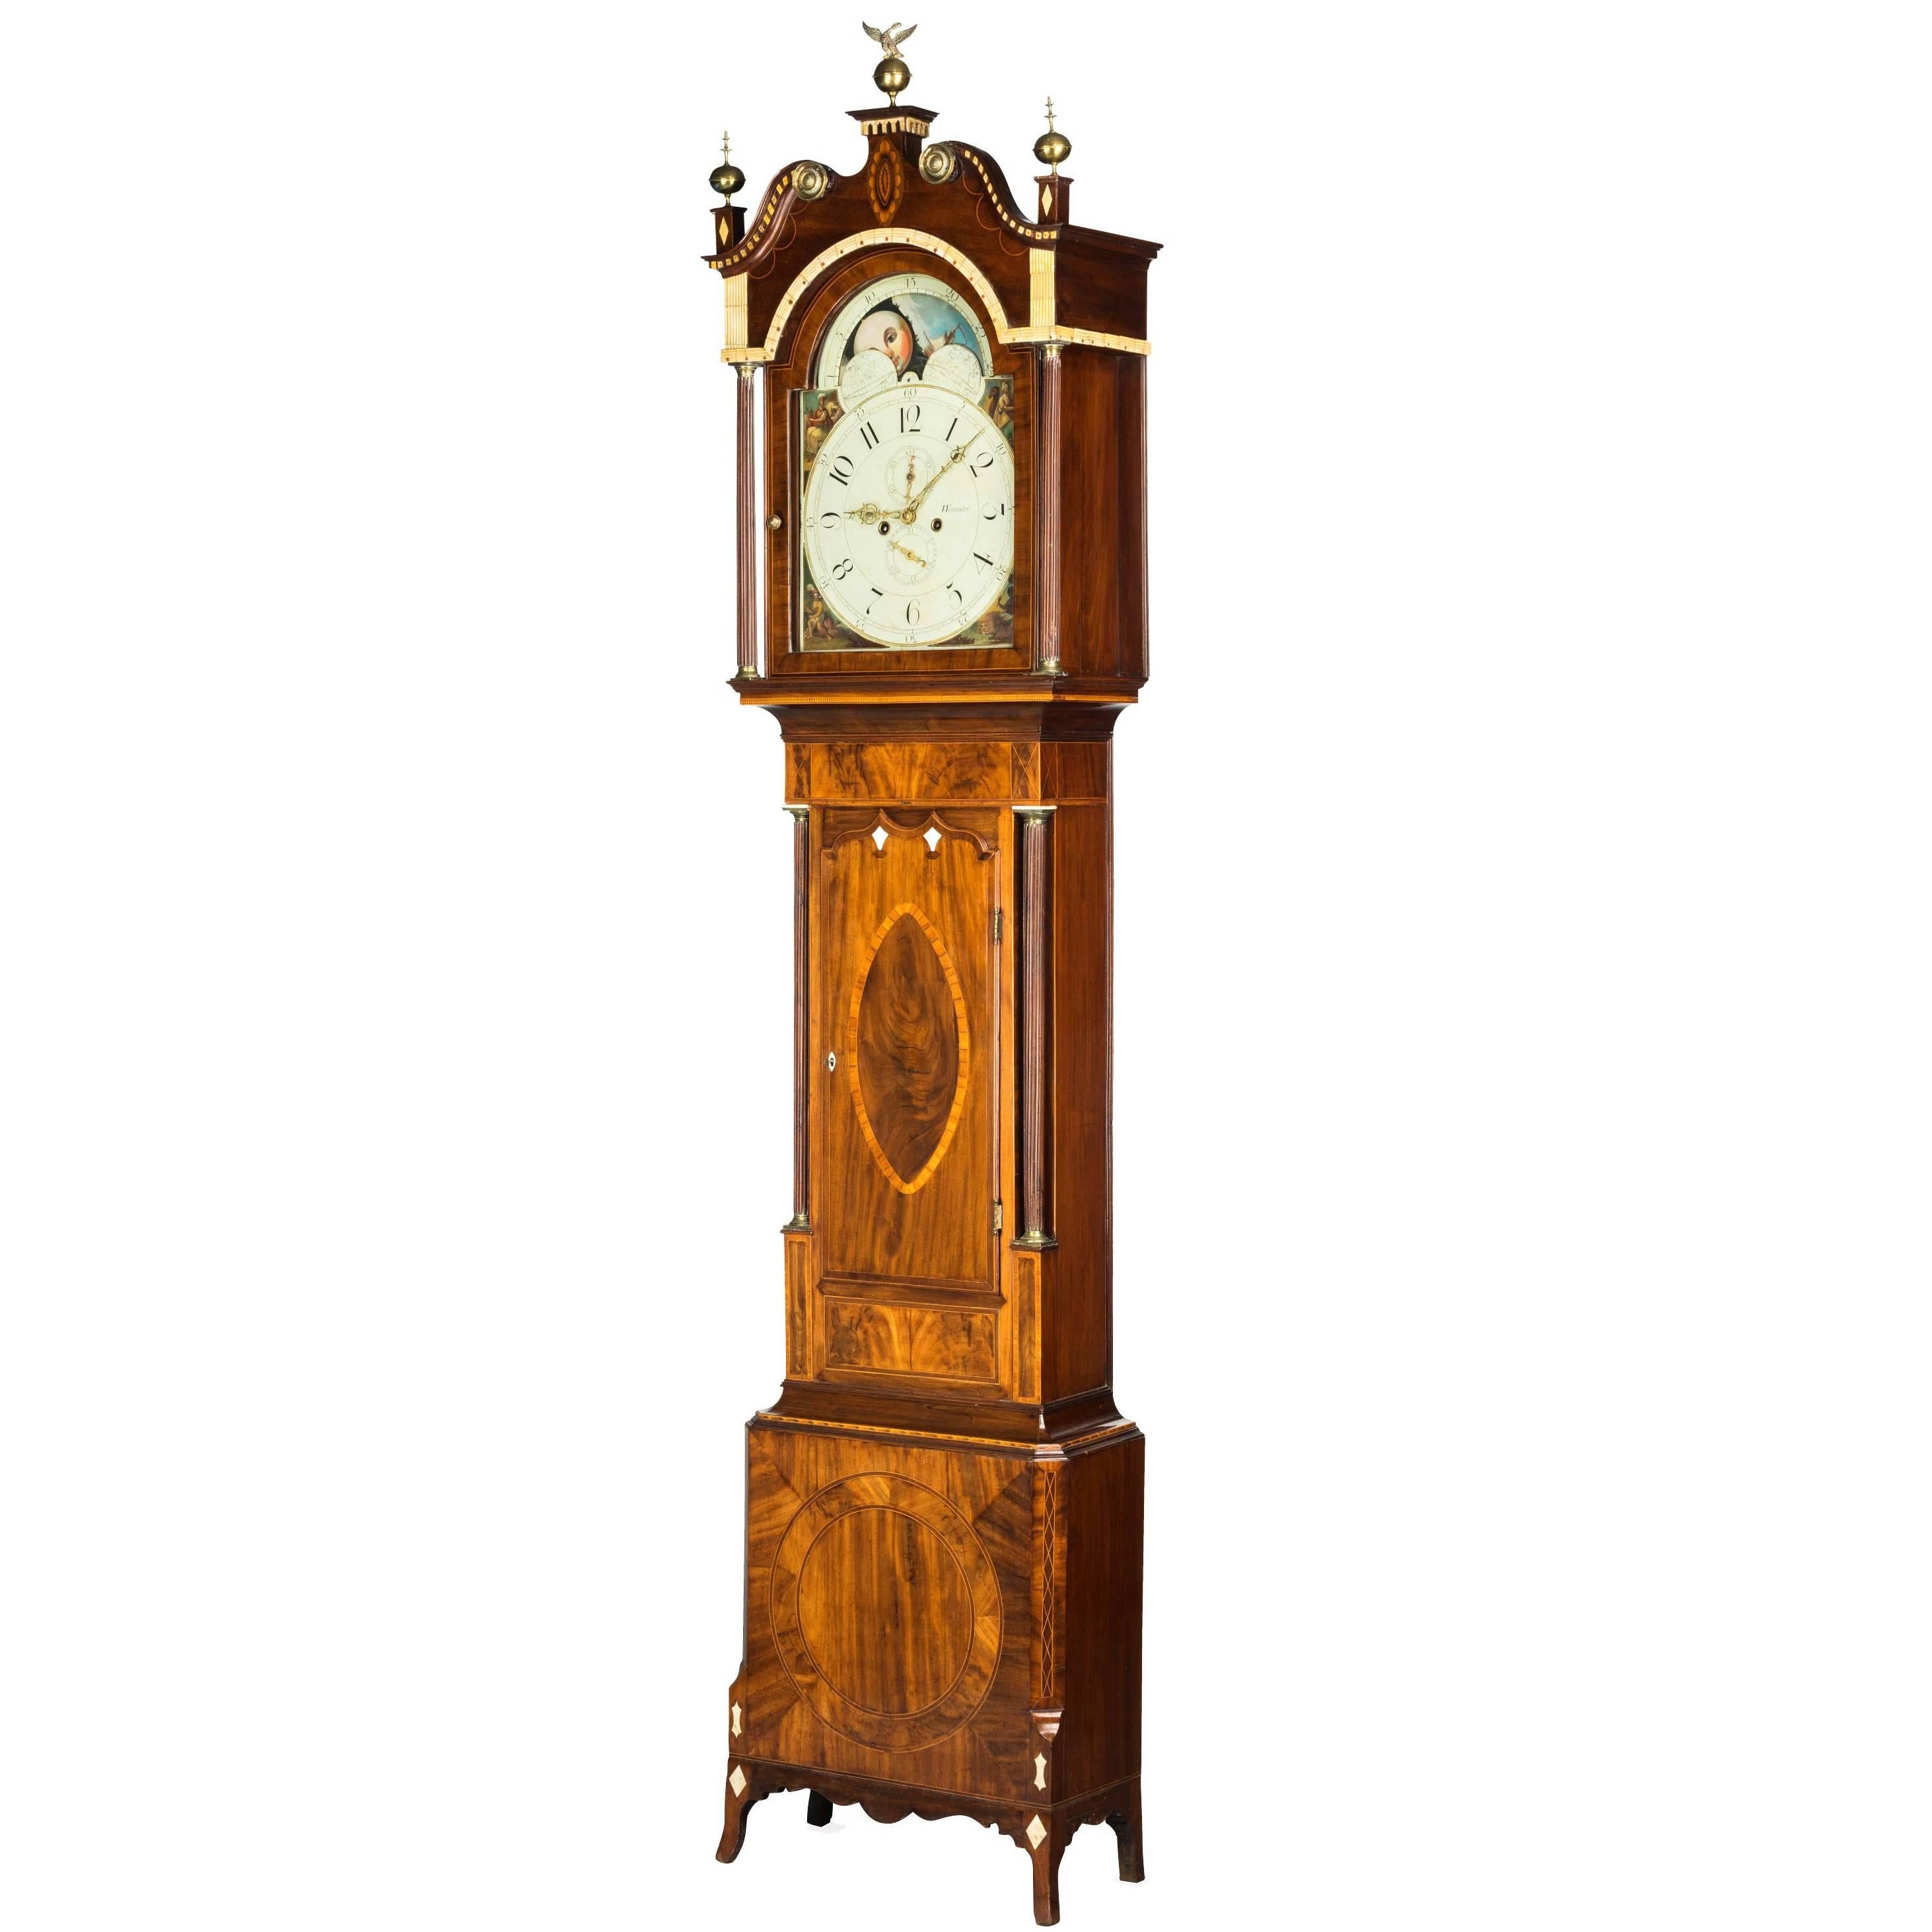 Regency Period Long-Case Clock by James Powell of Worcester